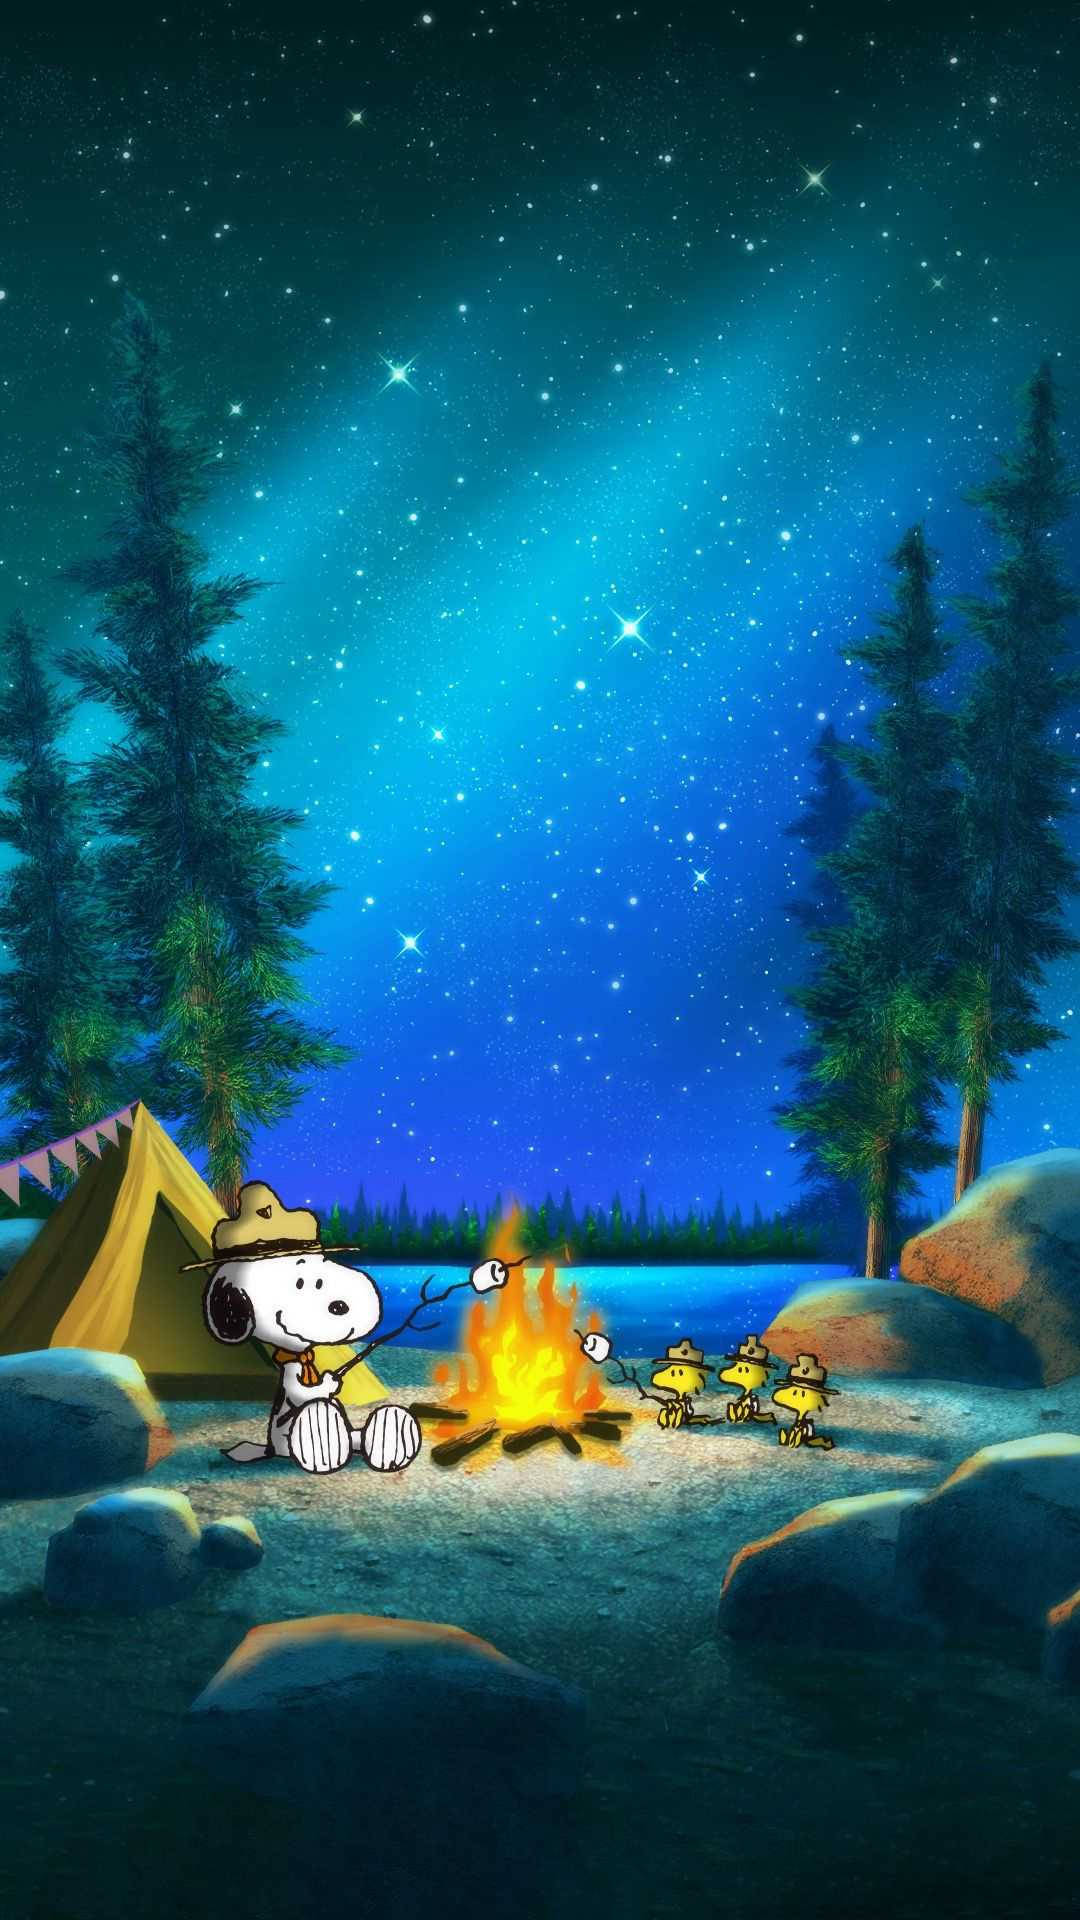 Snoopy Christmas Campfire Iphone Wallpaper